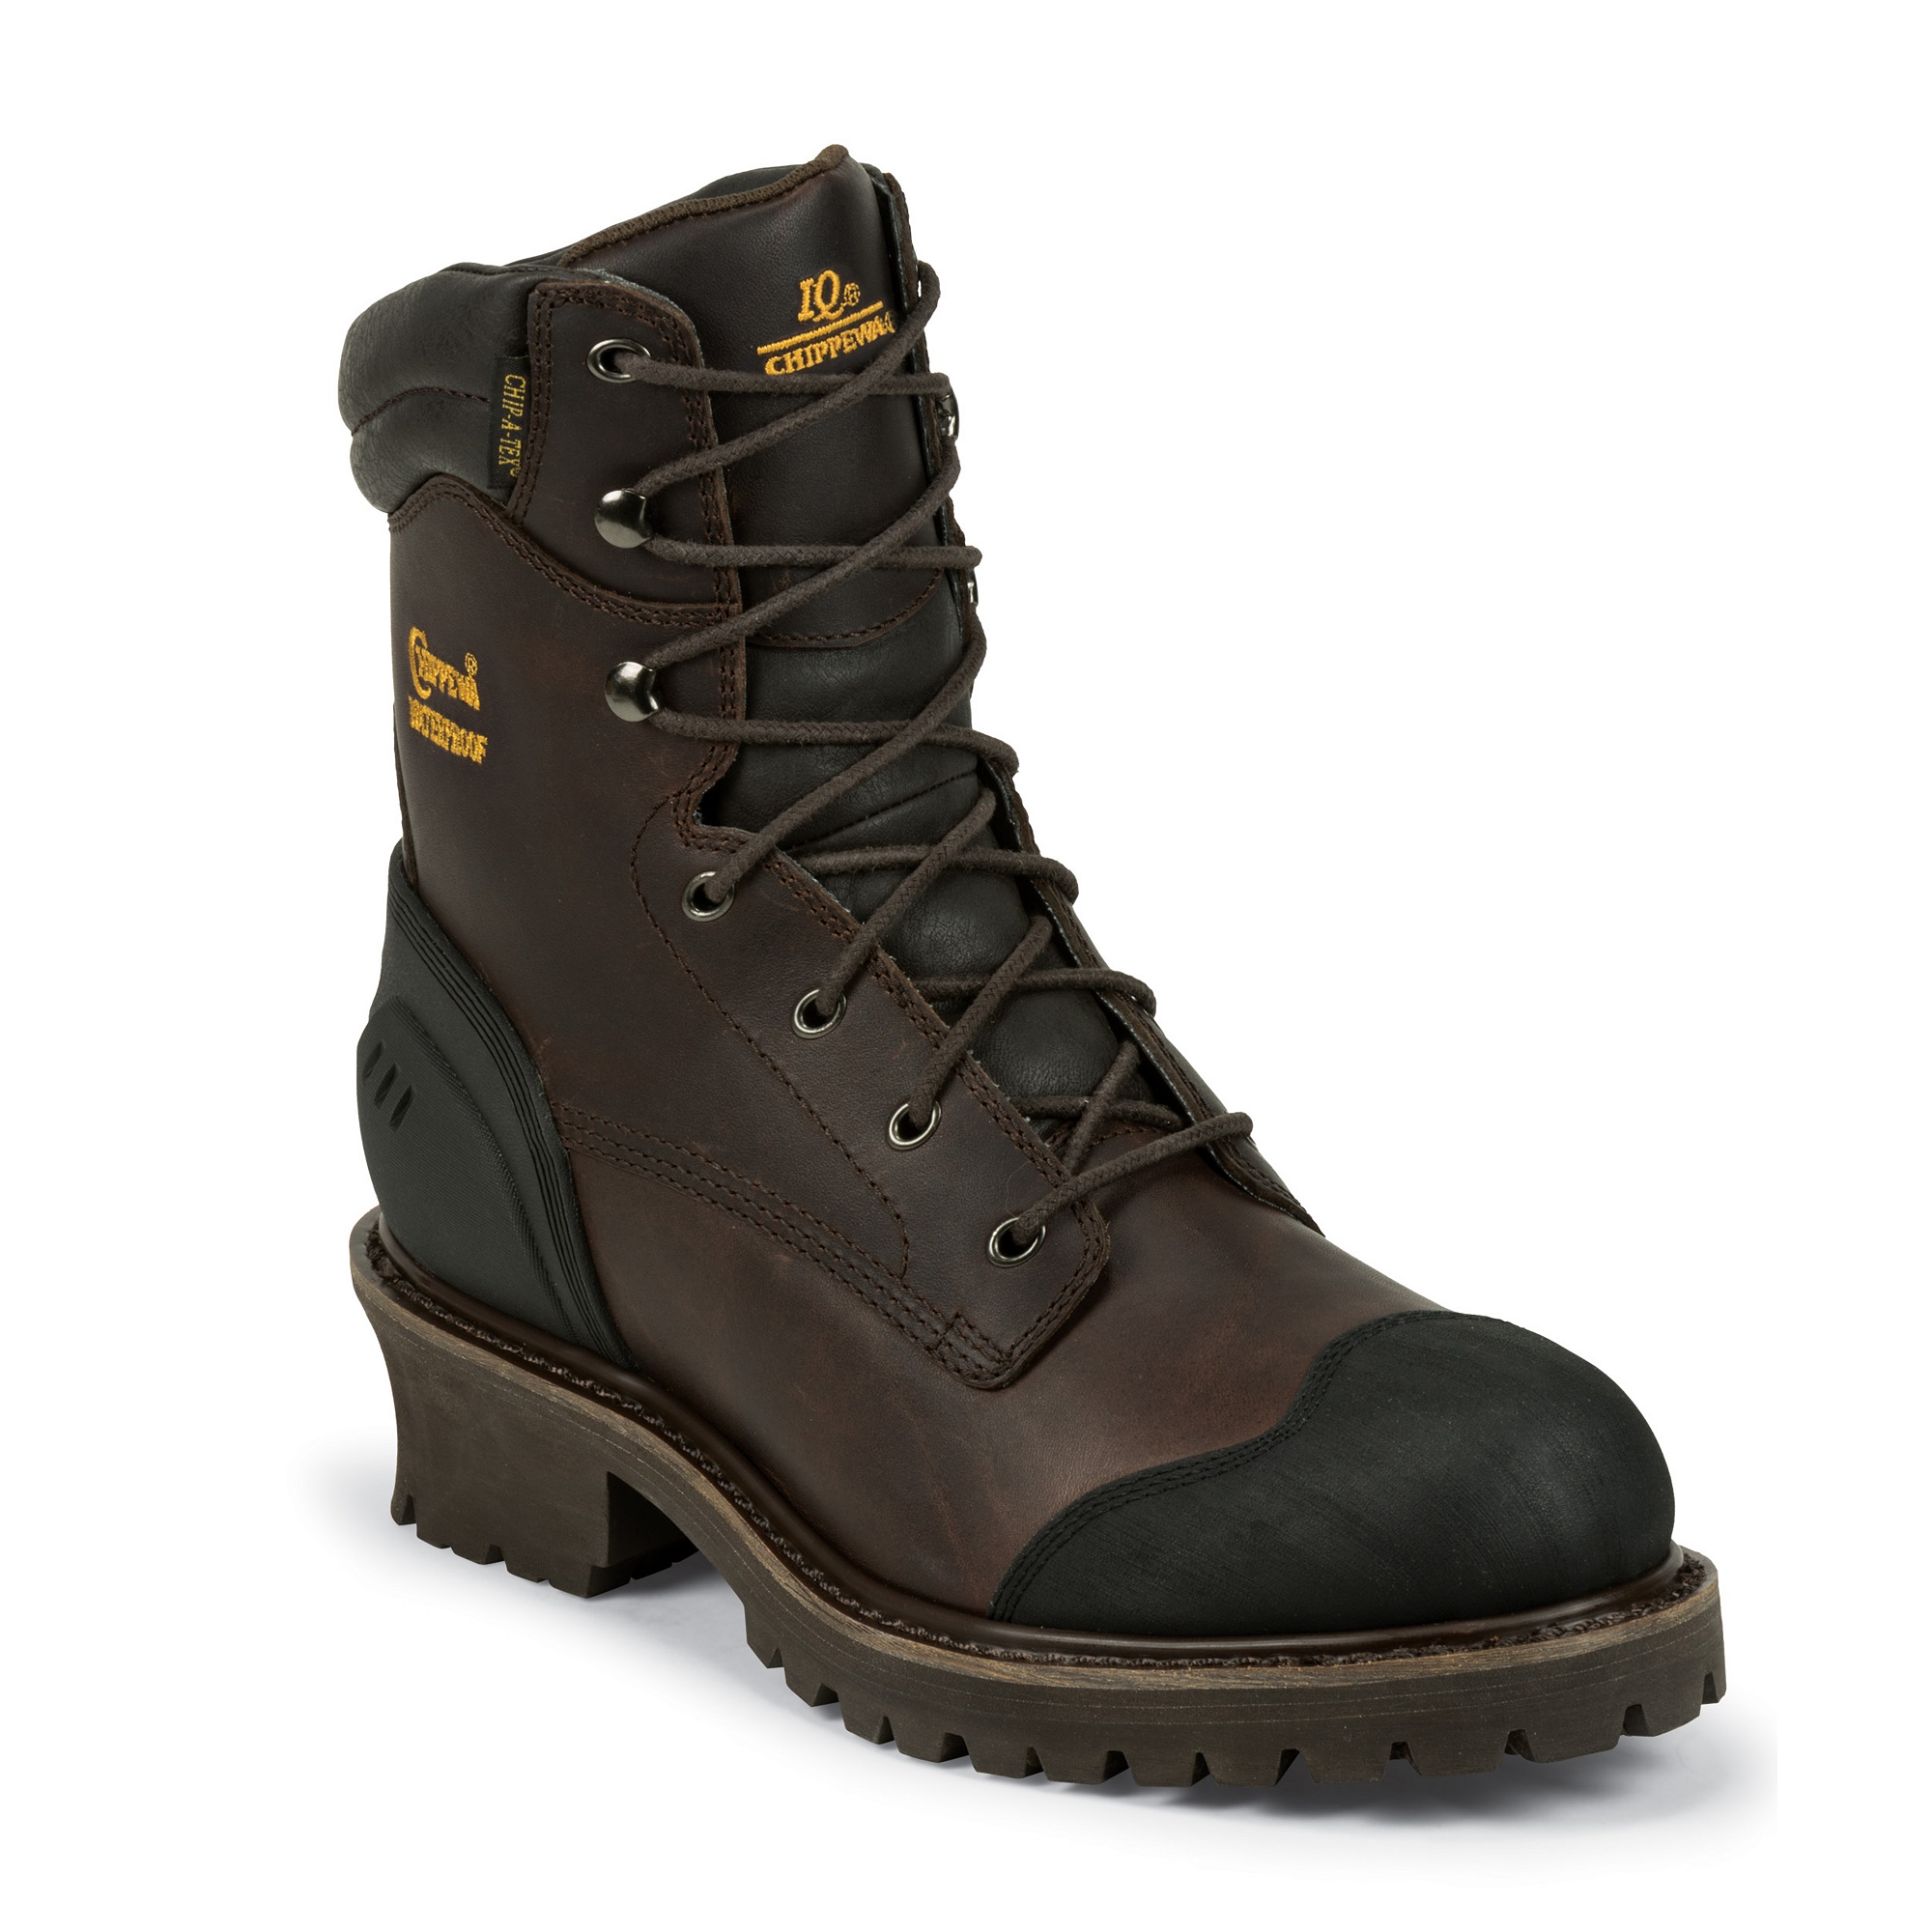 Chippewa 8" Oiled Waterproof Insulated Logger Composite Toe